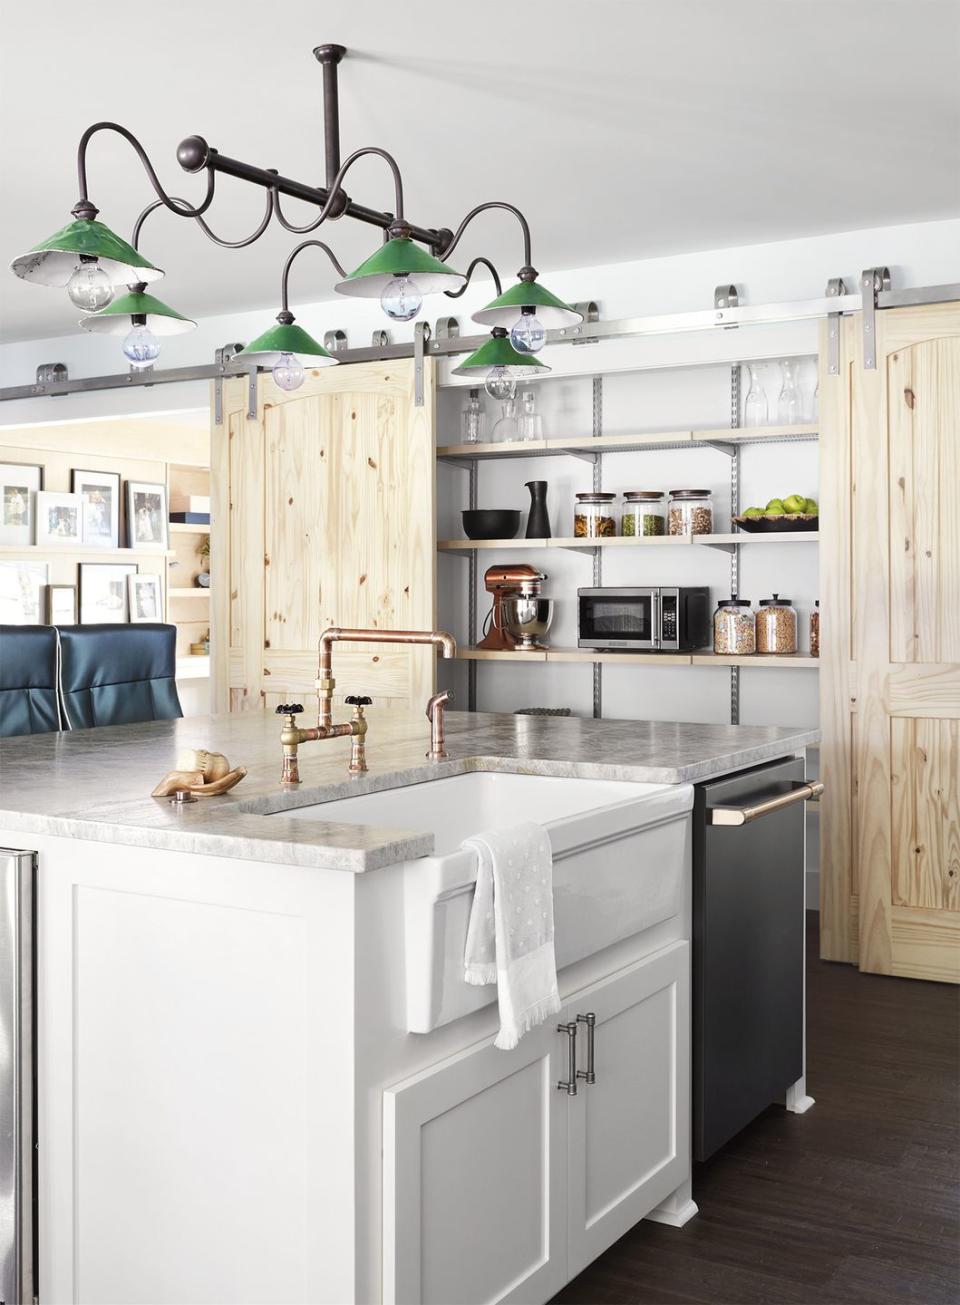 kitchen with character by texas designer grace mitchell of hgtv’s one of a kind sliding pantry doors